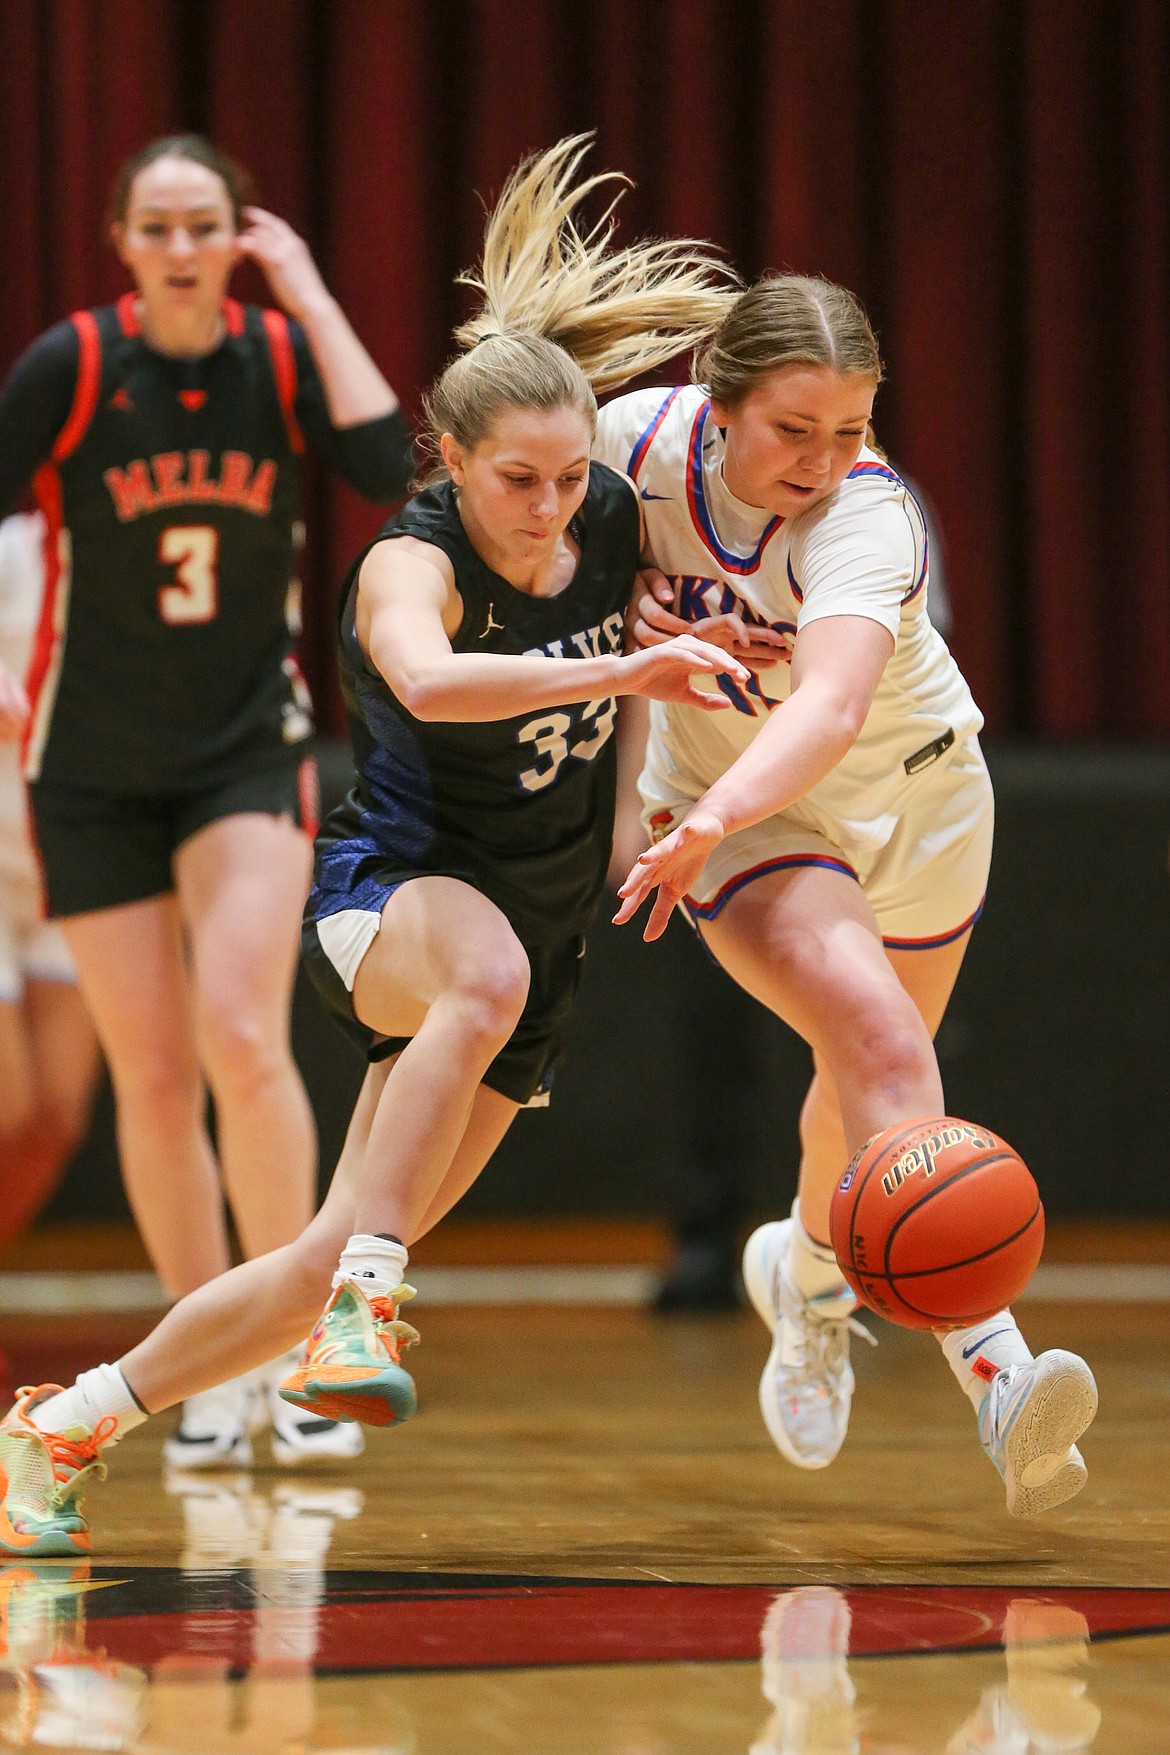 JASON DUCHOW PHOTOGRAPHY
Coeur d'Alene forward Madi Symons battles for a loose ball with Timberline's Lauren McCall during the first half of Saturday's 20th annual girls Idaho High School All-Star Game at North Idaho College.